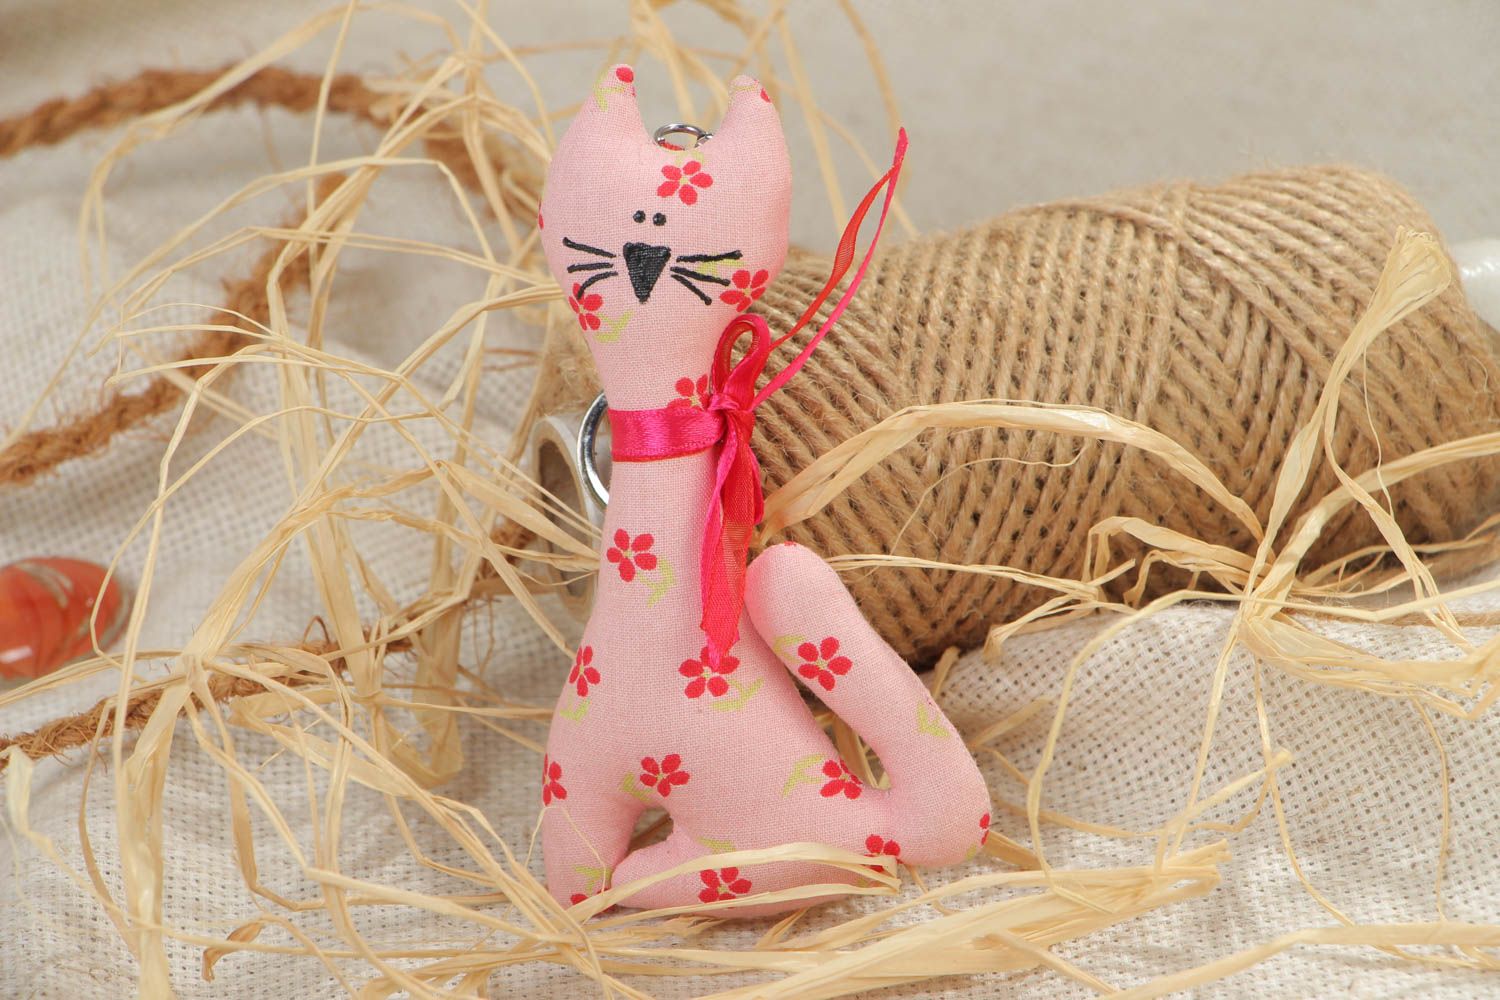 Handmade soft toy keychain sewn of pink polka dot cotton fabric in the shape of cat photo 1